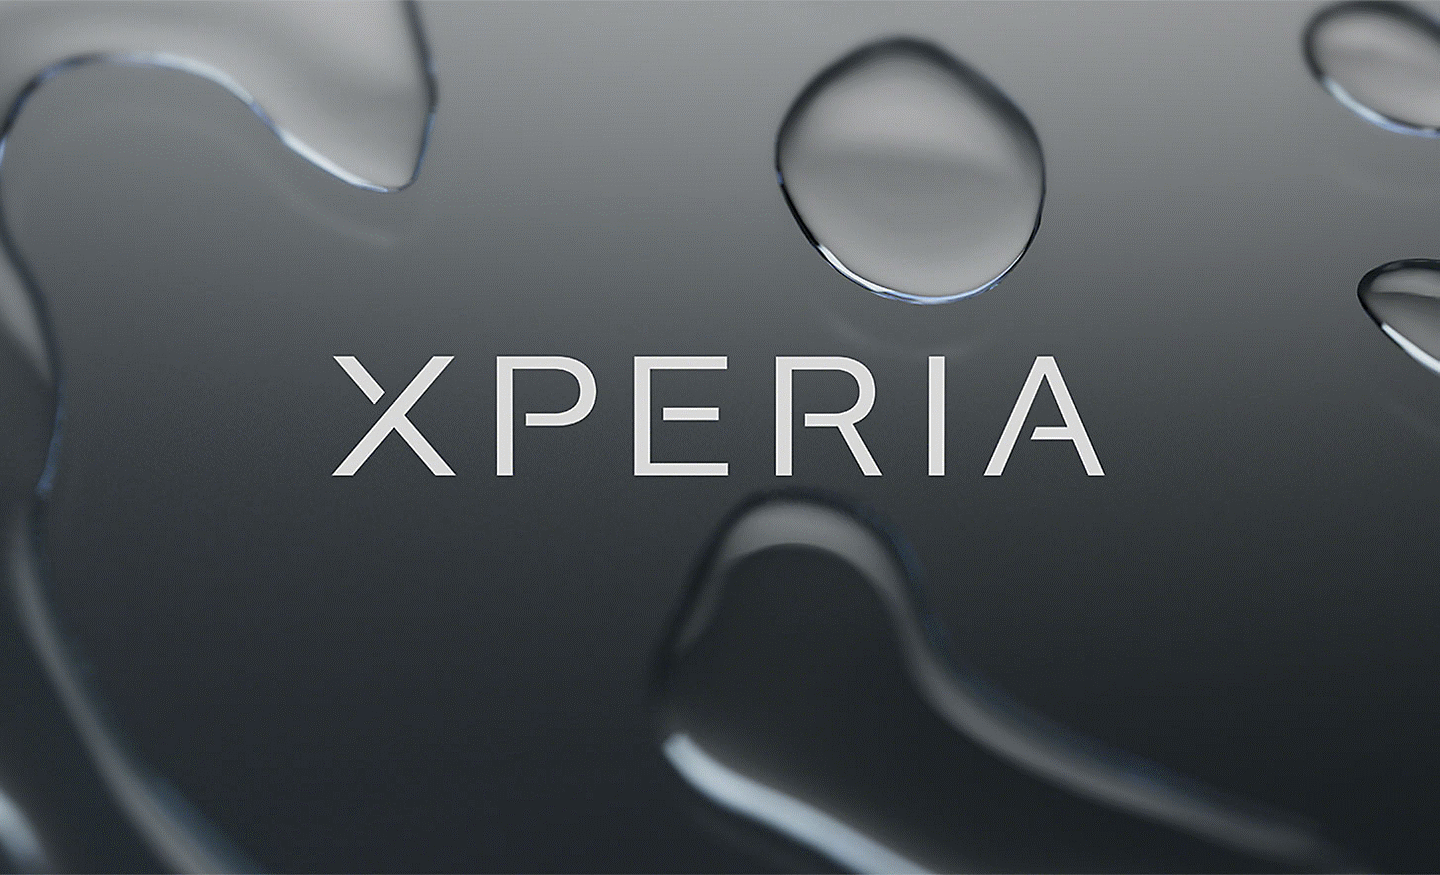 Image of an xperia logo surround by water drops